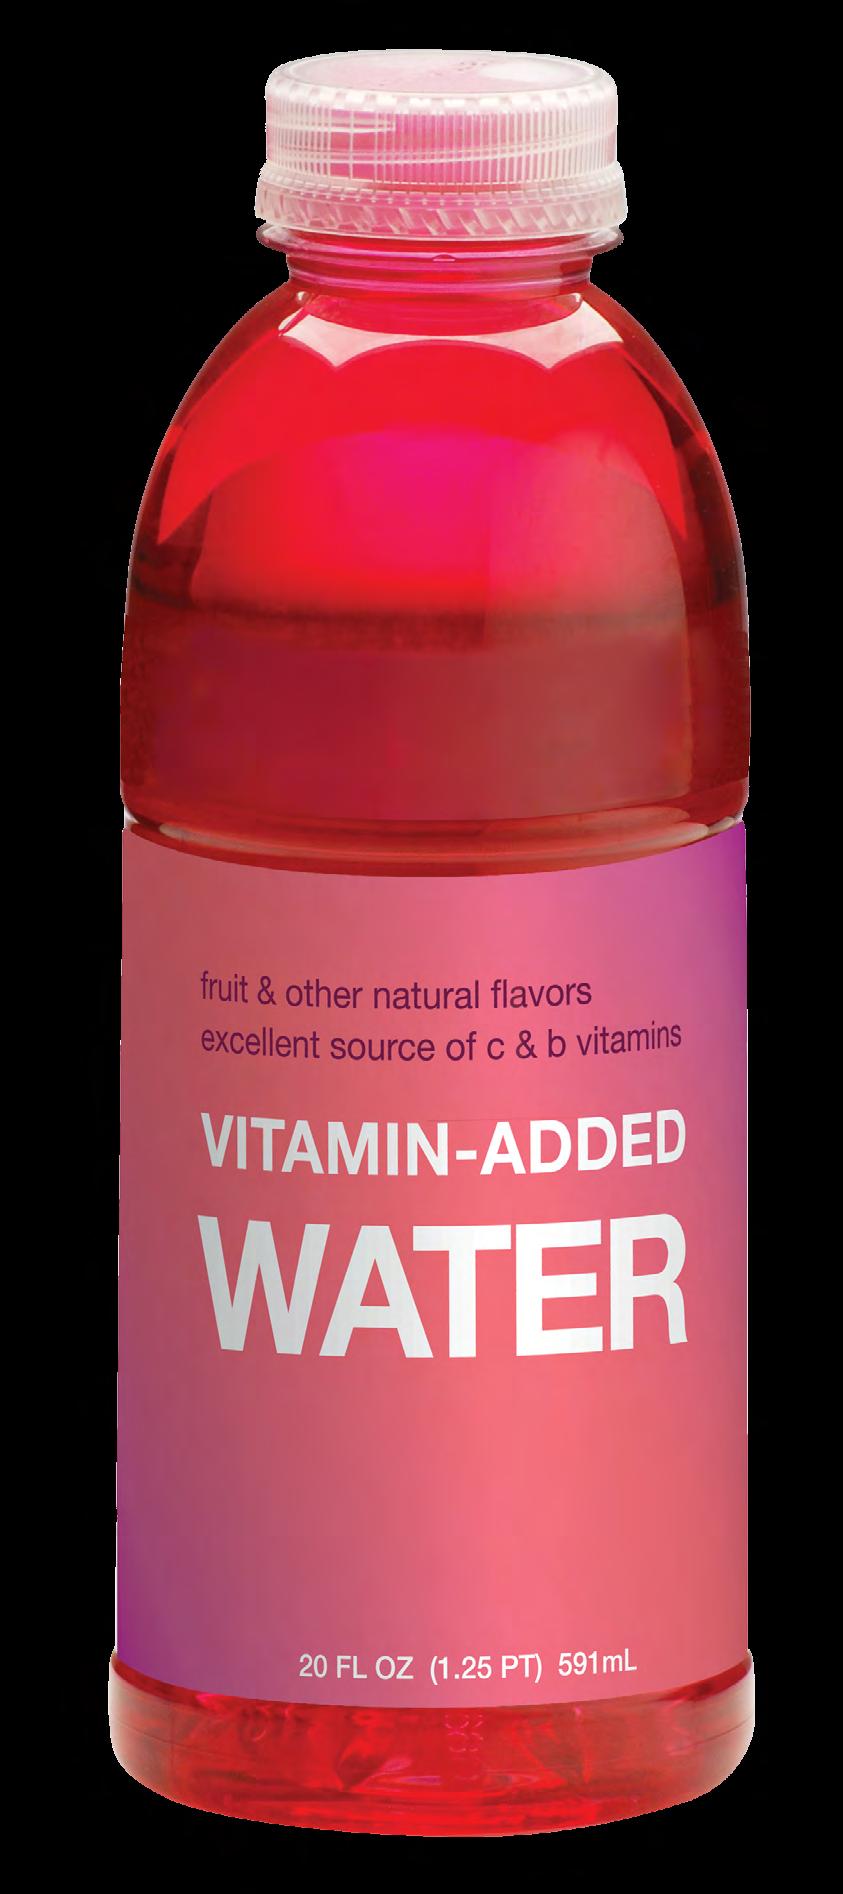 Vitamin-added Water Servings Per Container 2.